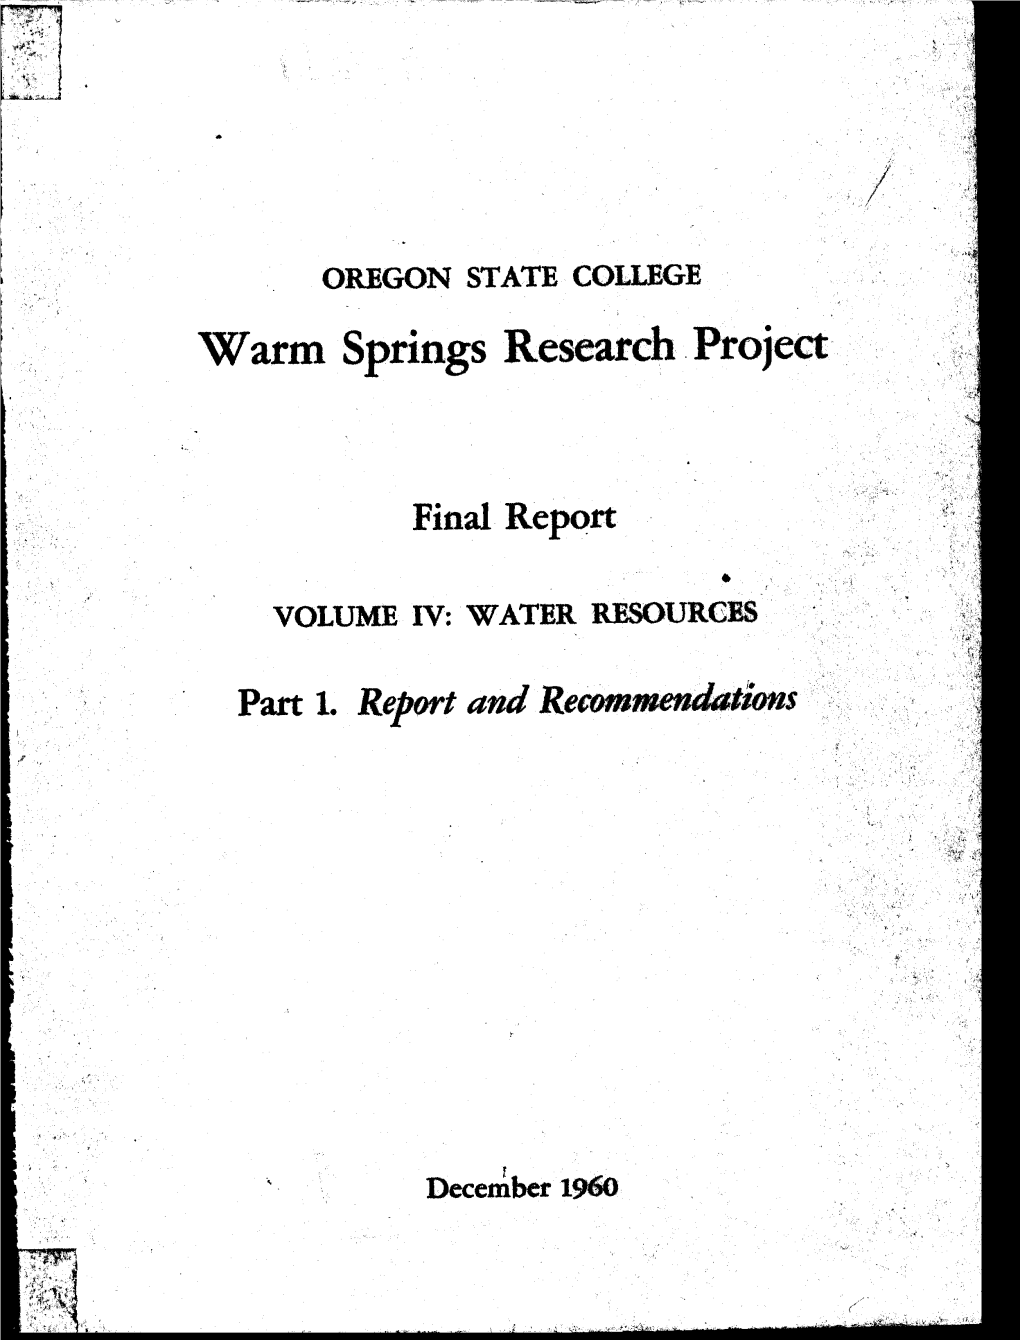 Warm Springs Research Project